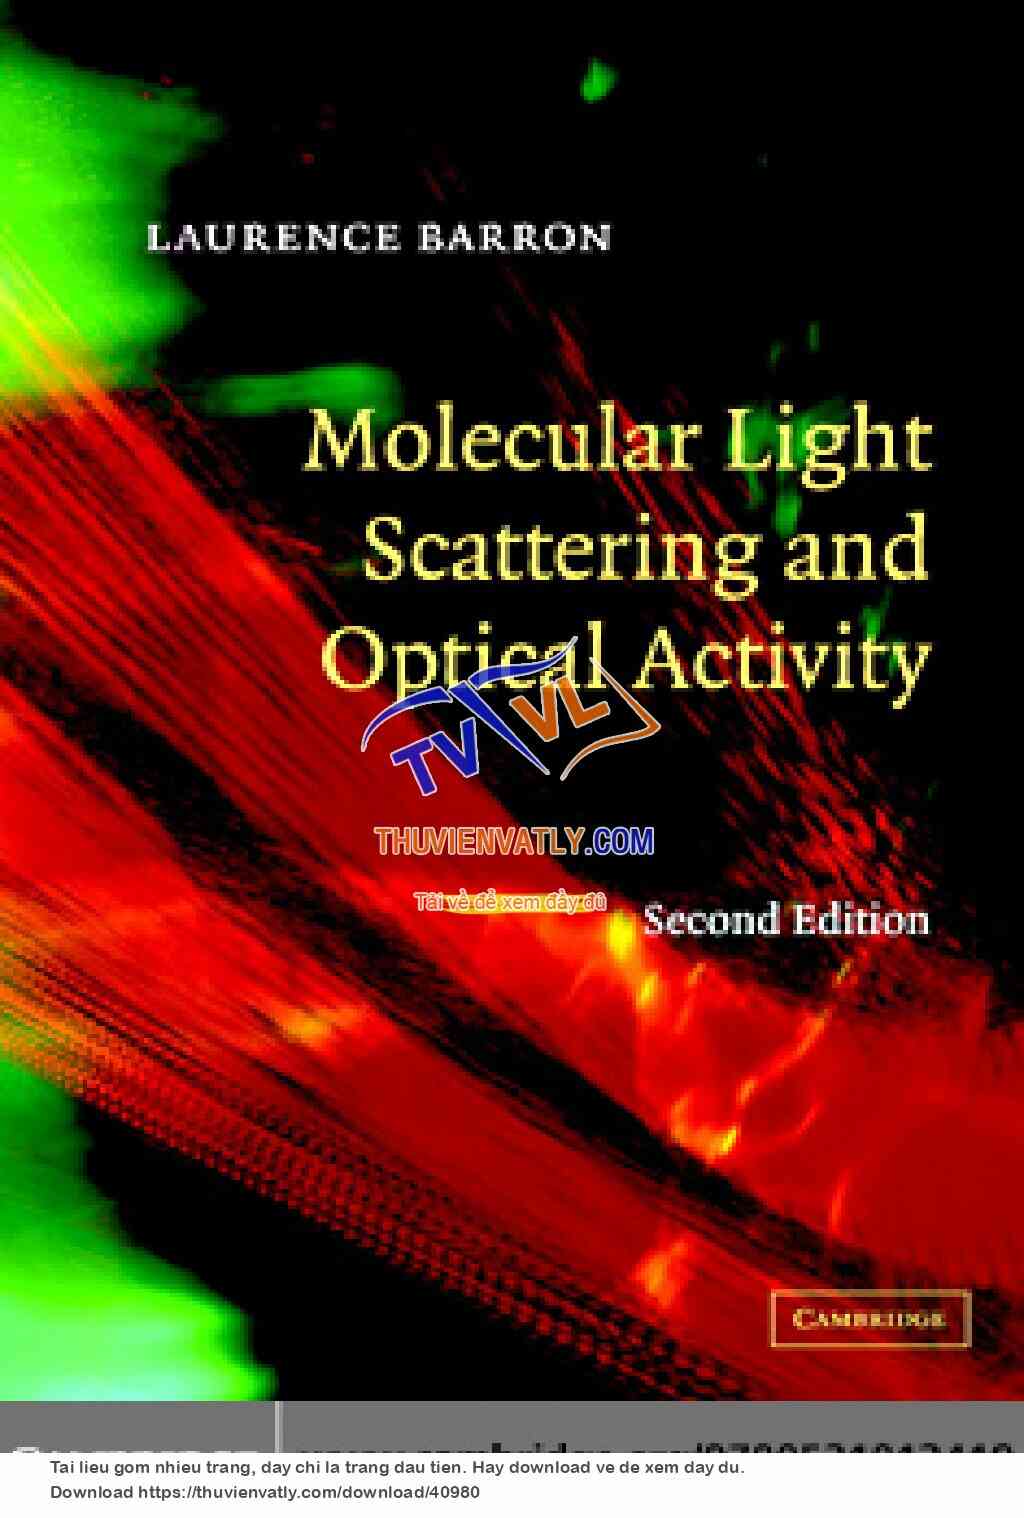 Molecular light scattering and optical activity